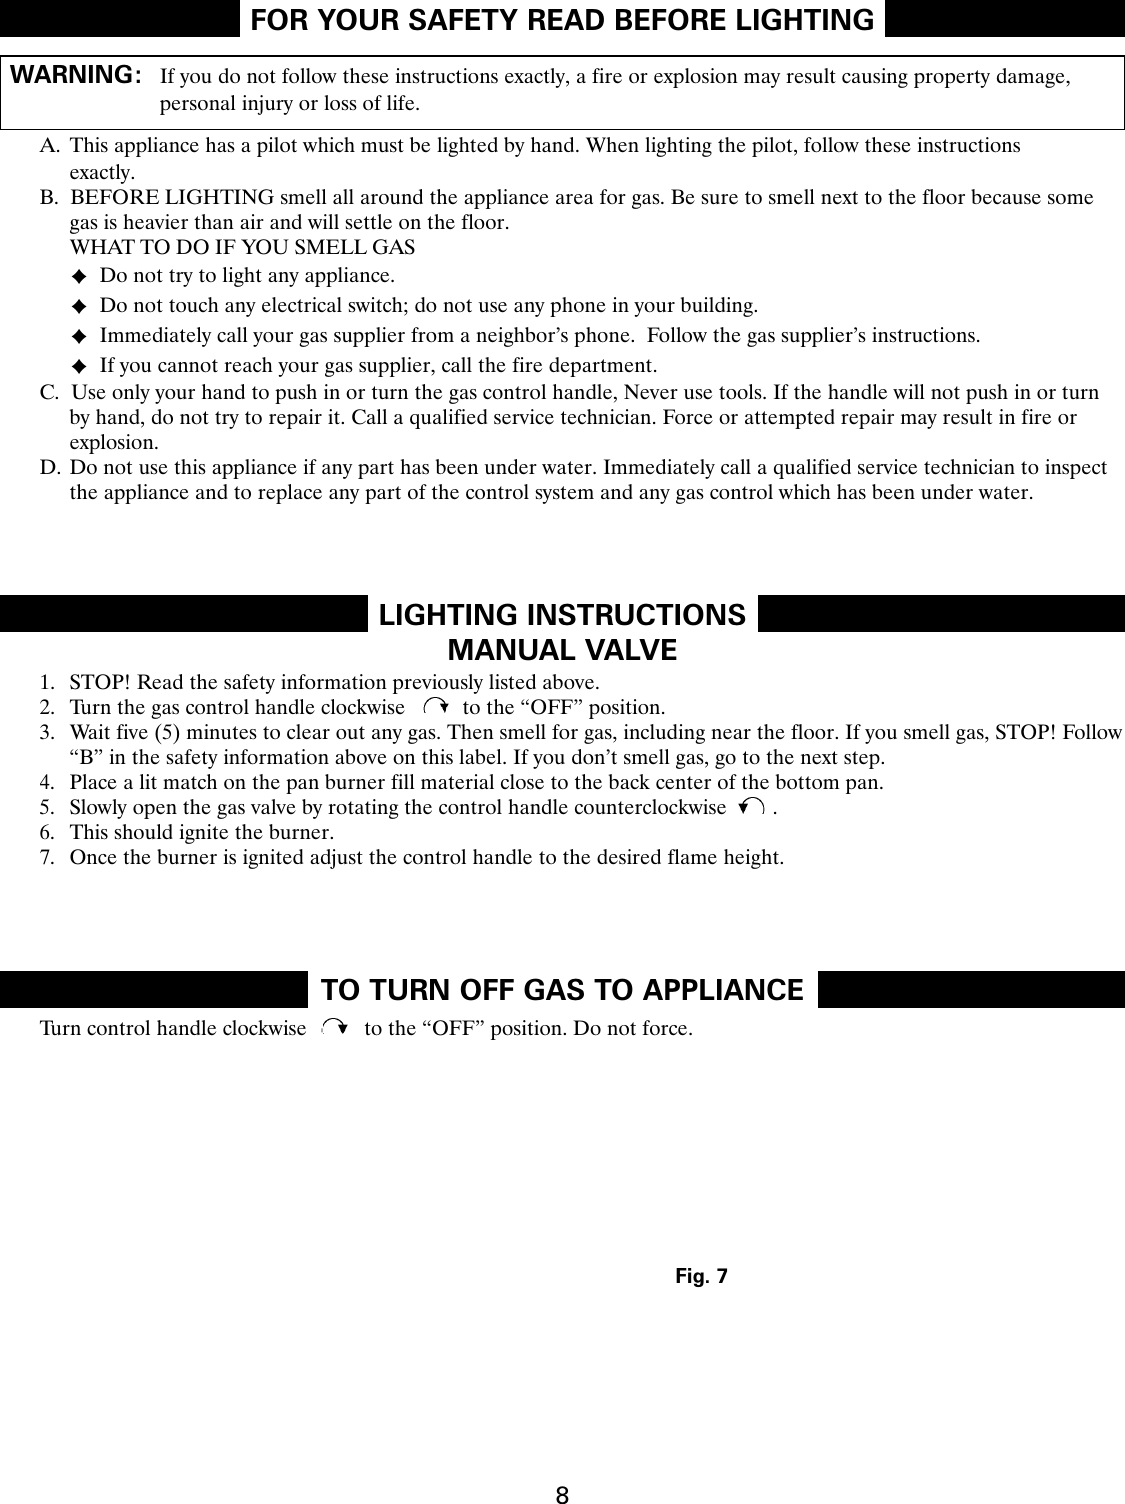 Page 8 of 11 - Heatmaster Heatmaster-Gas-Burner-Users-Manual- Hm142000  Heatmaster-gas-burner-users-manual